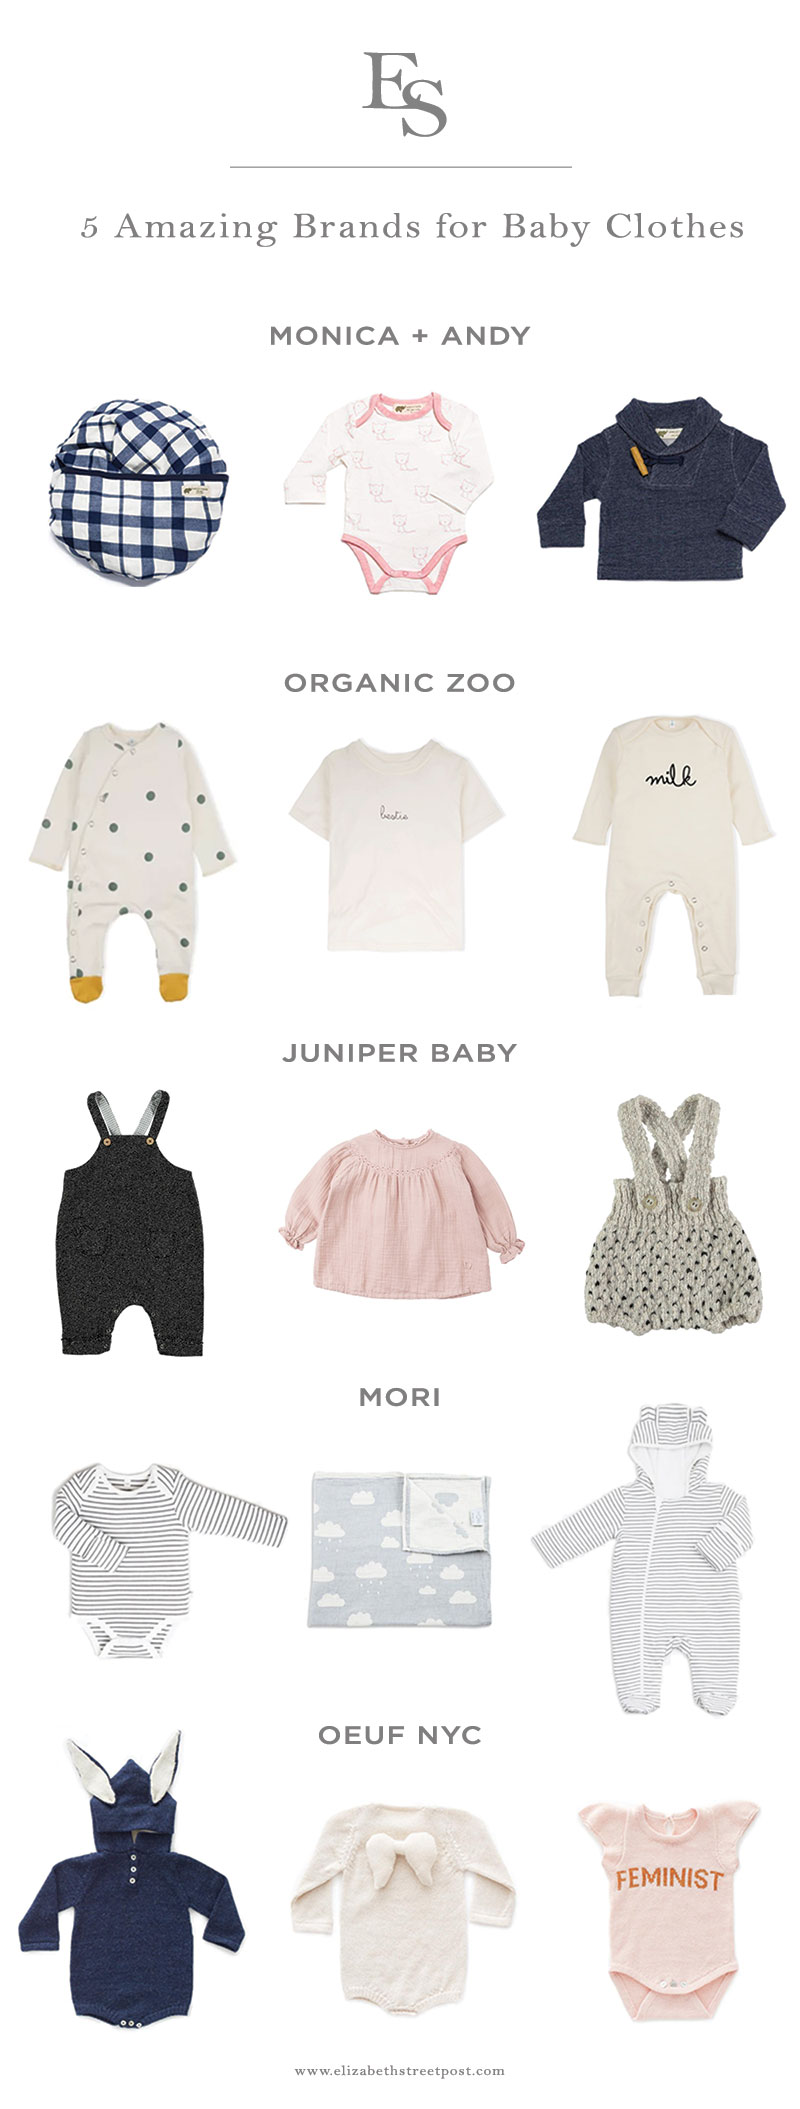 5 Amazing Brands for (Organic) Baby Clothes - Elizabeth Street Post